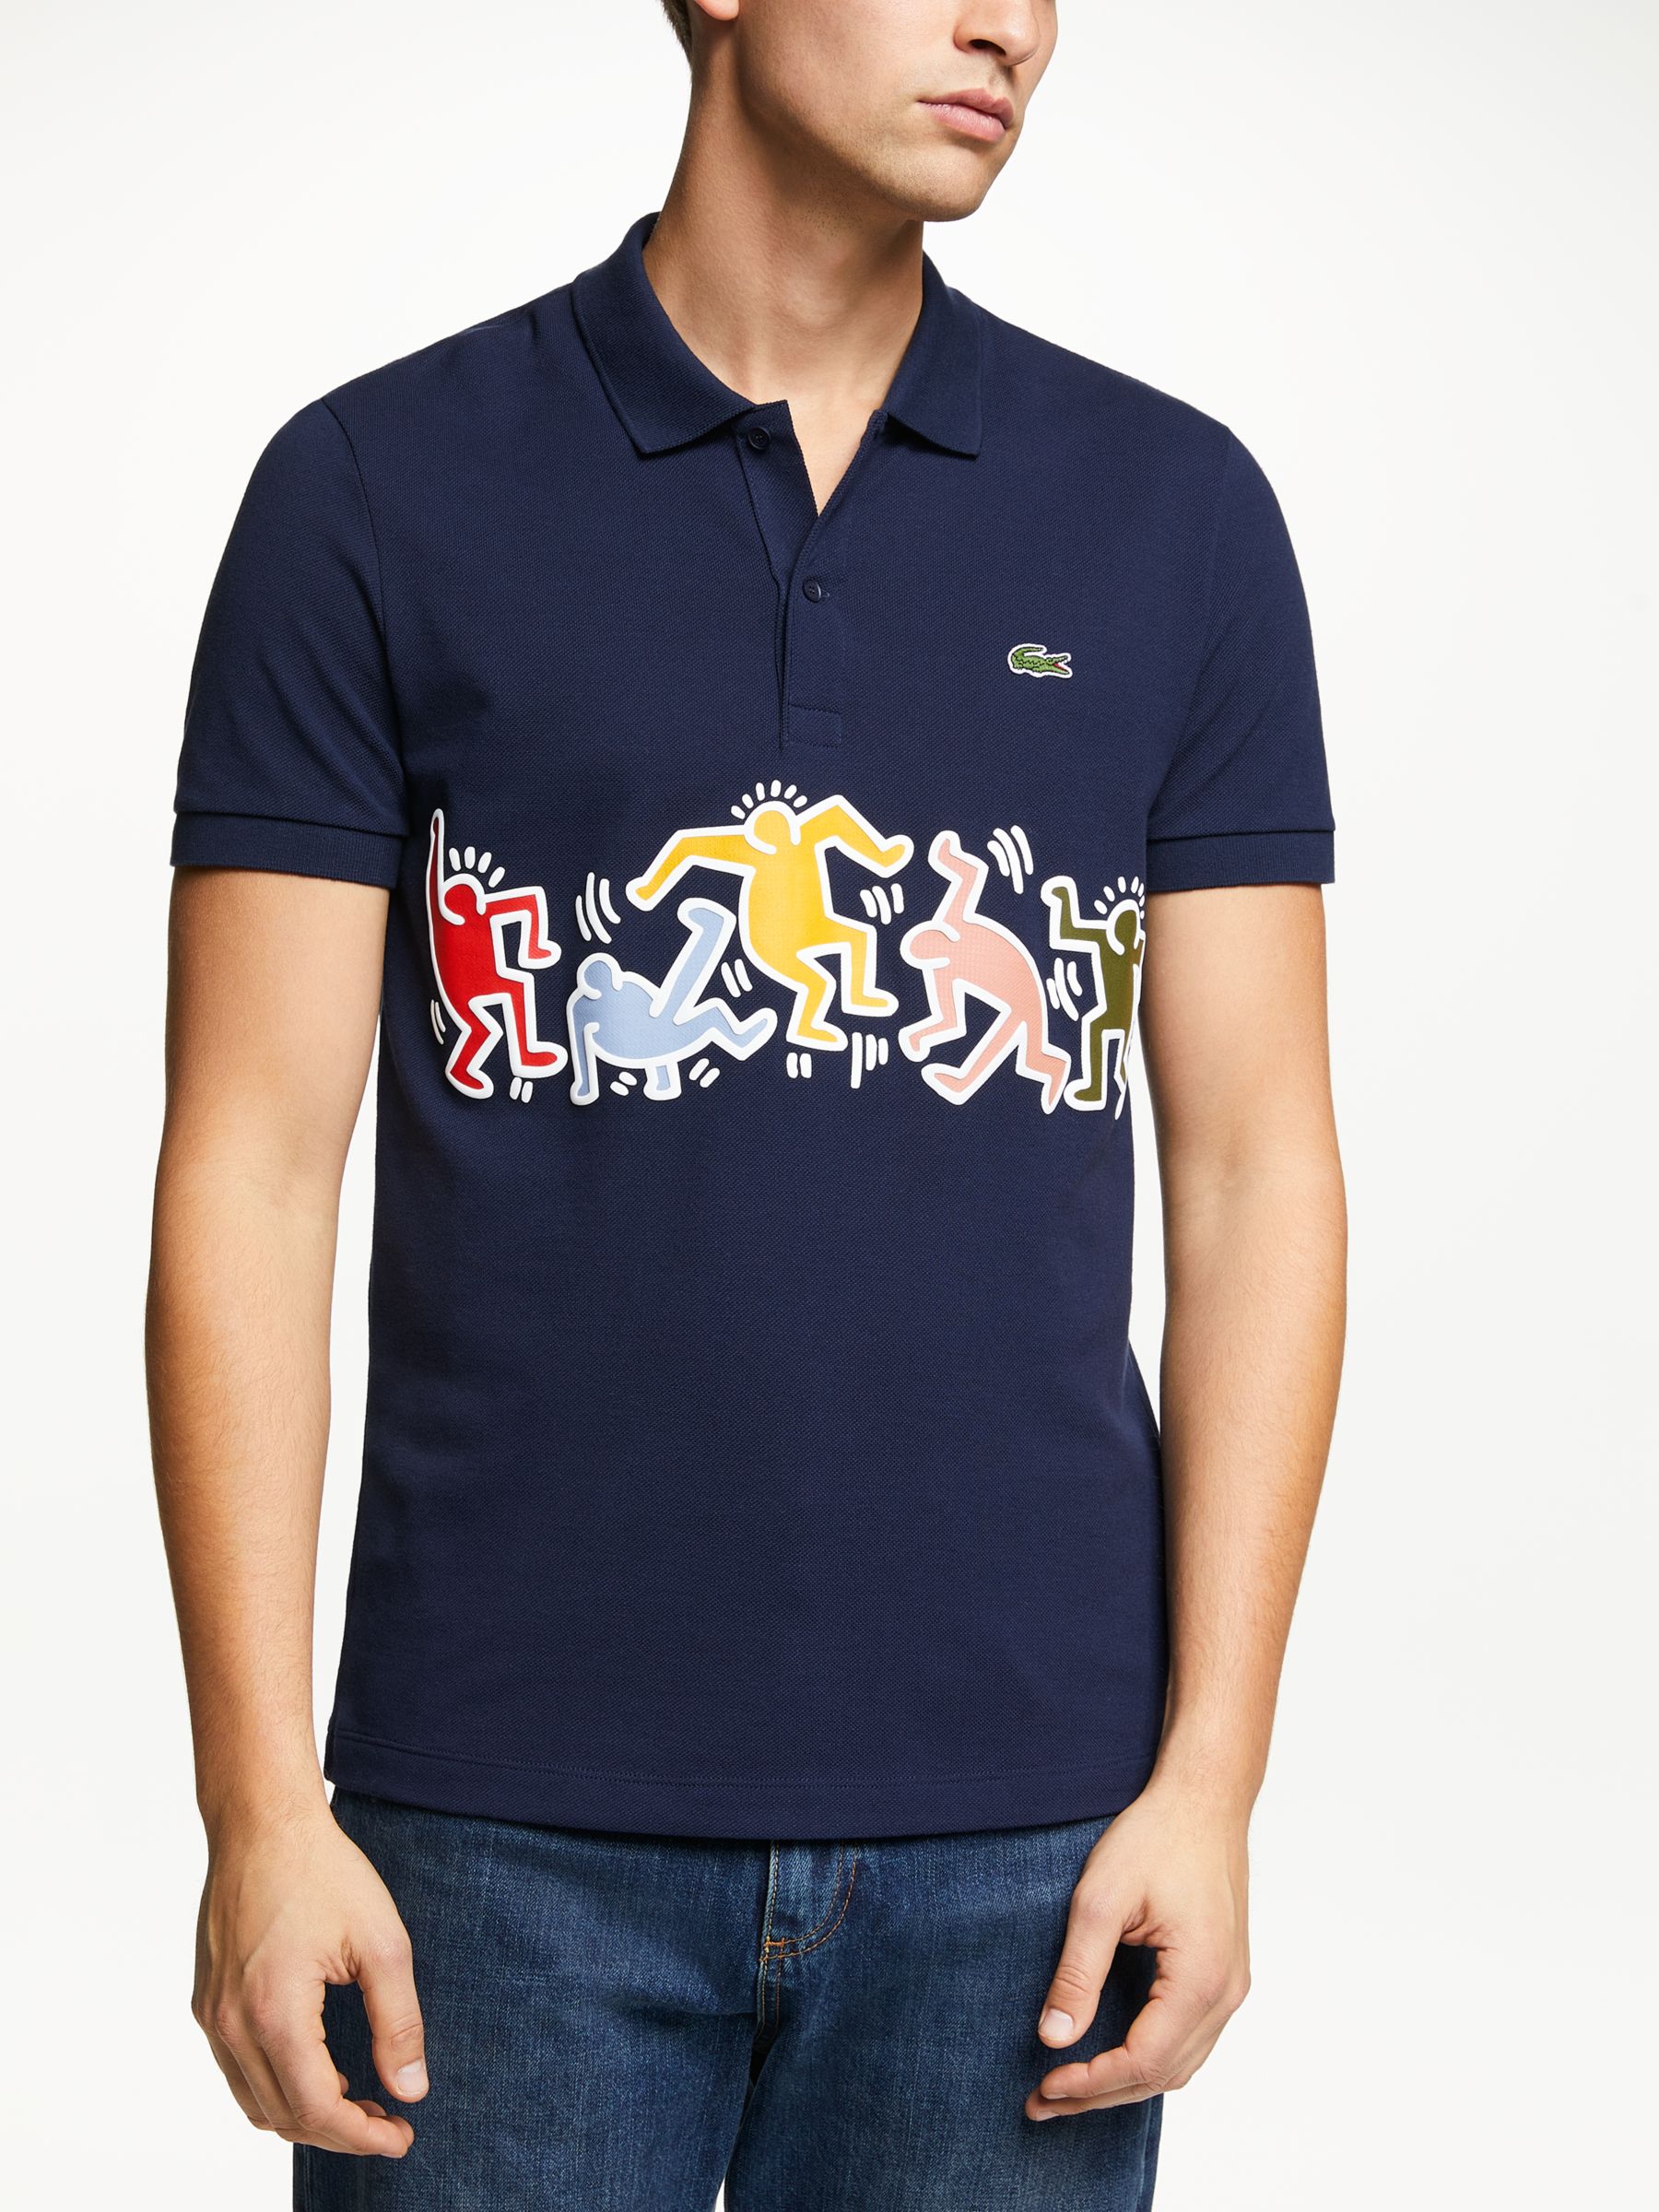 keith haring lacoste shirt